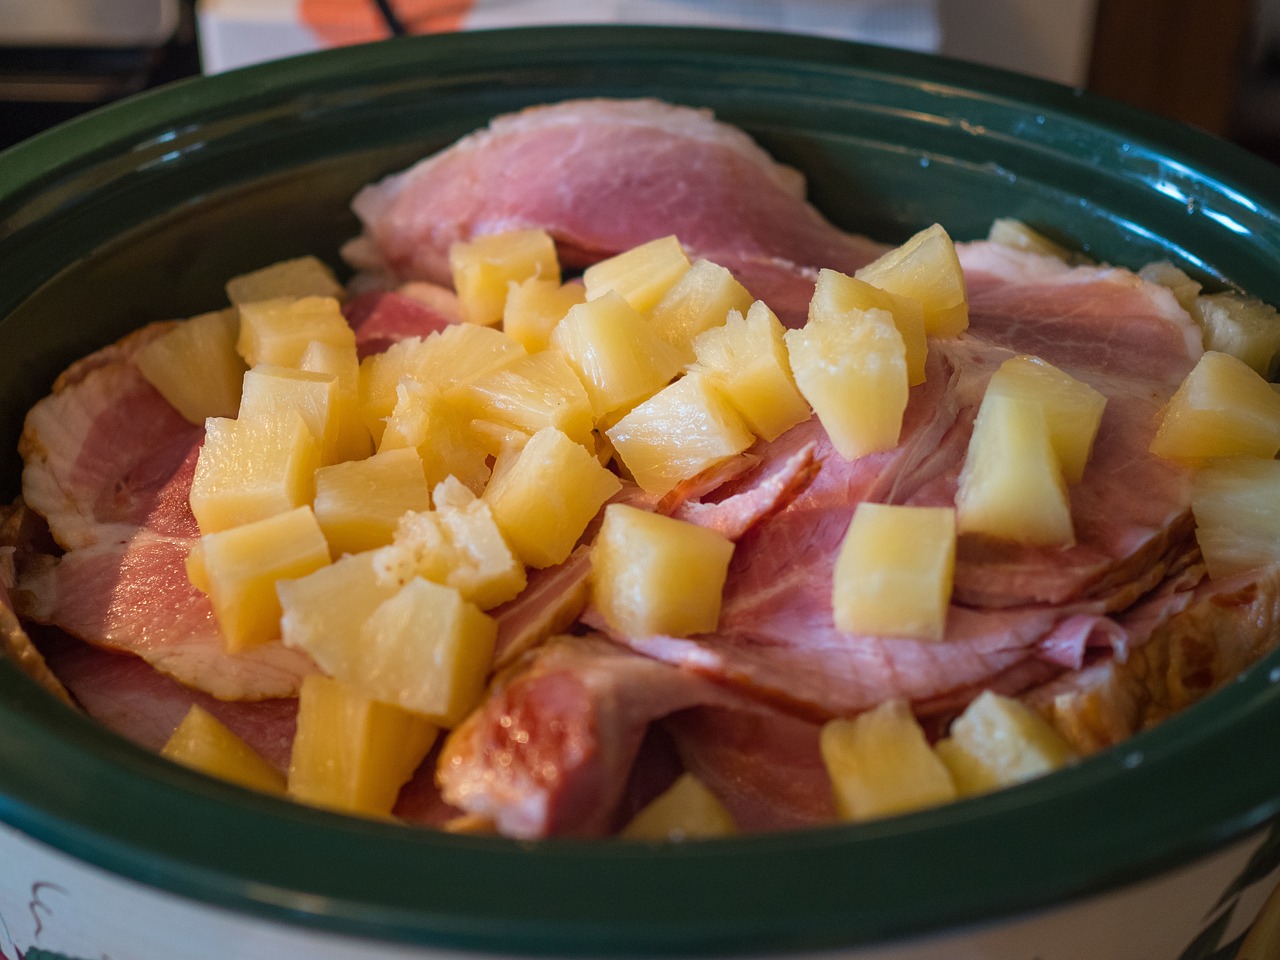 What Are The Basic Steps For Using A Crock Pot?